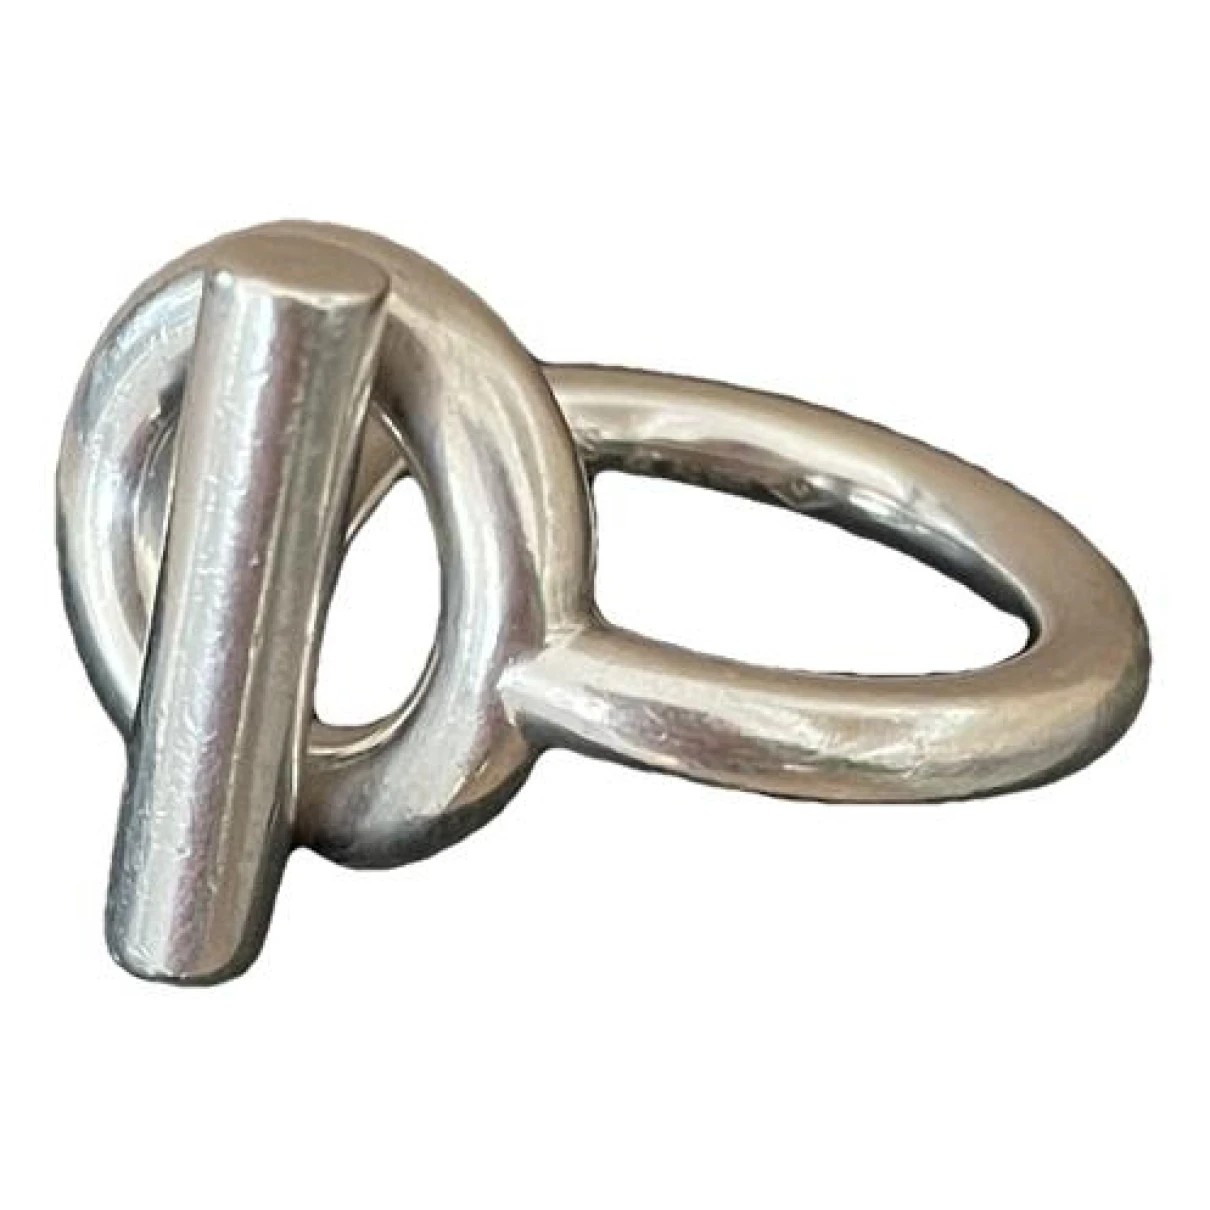 jewellery Hermès rings for Female Silver 54 EU. Used condition